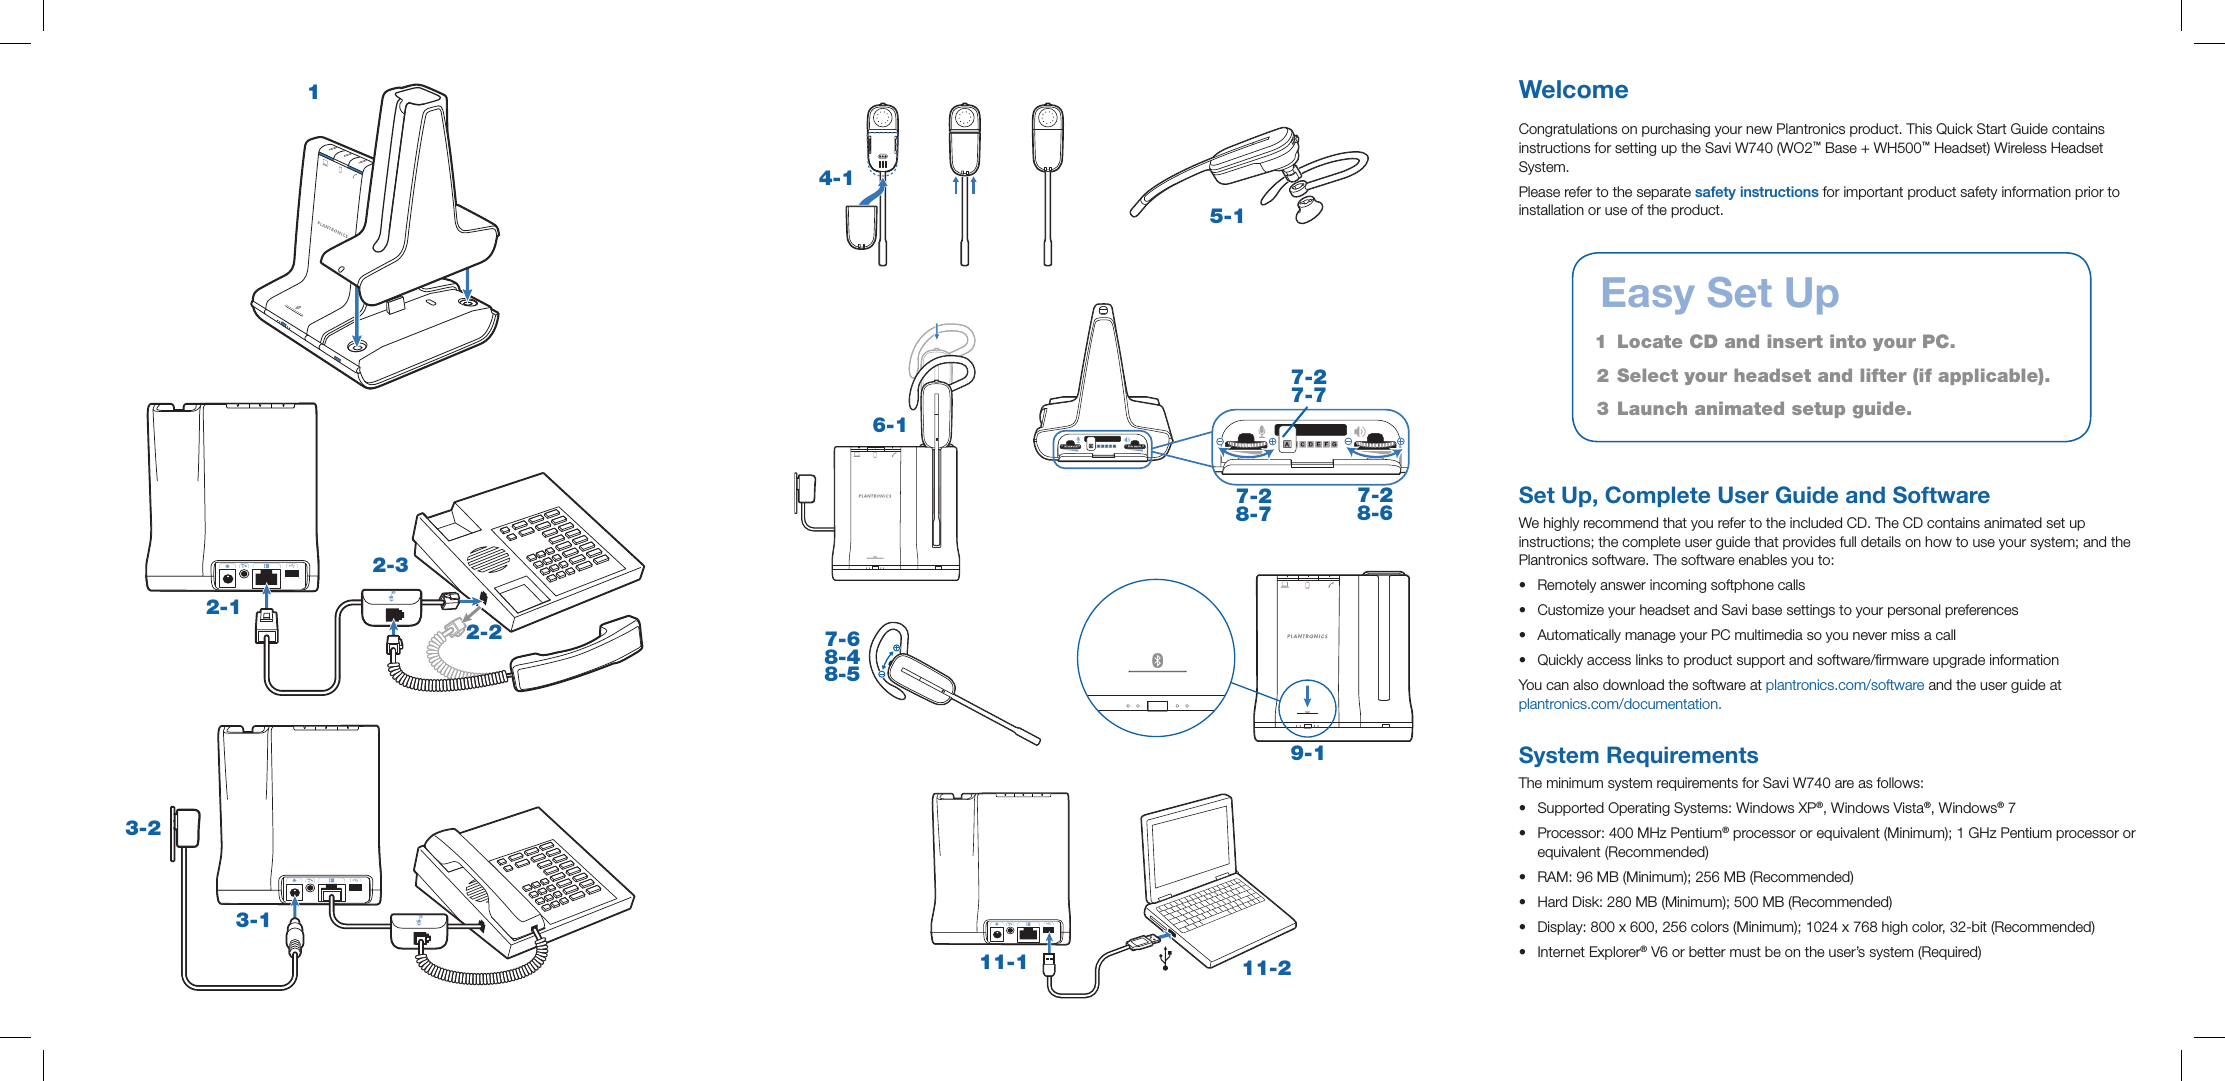 3-13-25-14-17-6 8-4 8-5 9-111-1 11-26-1WelcomeCongratulations on purchasing your new Plantronics product. This Quick Start Guide contains instructions for setting up the Savi W740 (WO2™ Base + WH500™ Headset) Wireless Headset System.Please refer to the separate safety instructions for important product safety information prior to installation or use of the product.Set Up, Complete User Guide and SoftwareWe highly recommend that you refer to the included CD. The CD contains animated set up instructions; the complete user guide that provides full details on how to use your system; and the Plantronics software. The software enables you to:•  Remotely answer incoming softphone calls•  Customize your headset and Savi base settings to your personal preferences•  Automatically manage your PC multimedia so you never miss a call•  Quickly access links to product support and software/rmware upgrade informationYou can also download the software at plantronics.com/software and the user guide at  plantronics.com/documentation. System RequirementsThe minimum system requirements for Savi W740 are as follows:•  Supported Operating Systems: Windows XP®, Windows Vista®, Windows® 7 •  Processor: 400 MHz Pentium® processor or equivalent (Minimum); 1 GHz Pentium processor or equivalent (Recommended) •  RAM: 96 MB (Minimum); 256 MB (Recommended) •  Hard Disk: 280 MB (Minimum); 500 MB (Recommended) •  Display: 800 x 600, 256 colors (Minimum); 1024 x 768 high color, 32-bit (Recommended) •  Internet Explorer® V6 or better must be on the user’s system (Required)   Easy Set Up1   Locate CD and insert into your PC.2  Select your headset and lifter (if applicable). 3  Launch animated setup guide.7-2 7-77-2 8-67-2 8-72-12-22-31